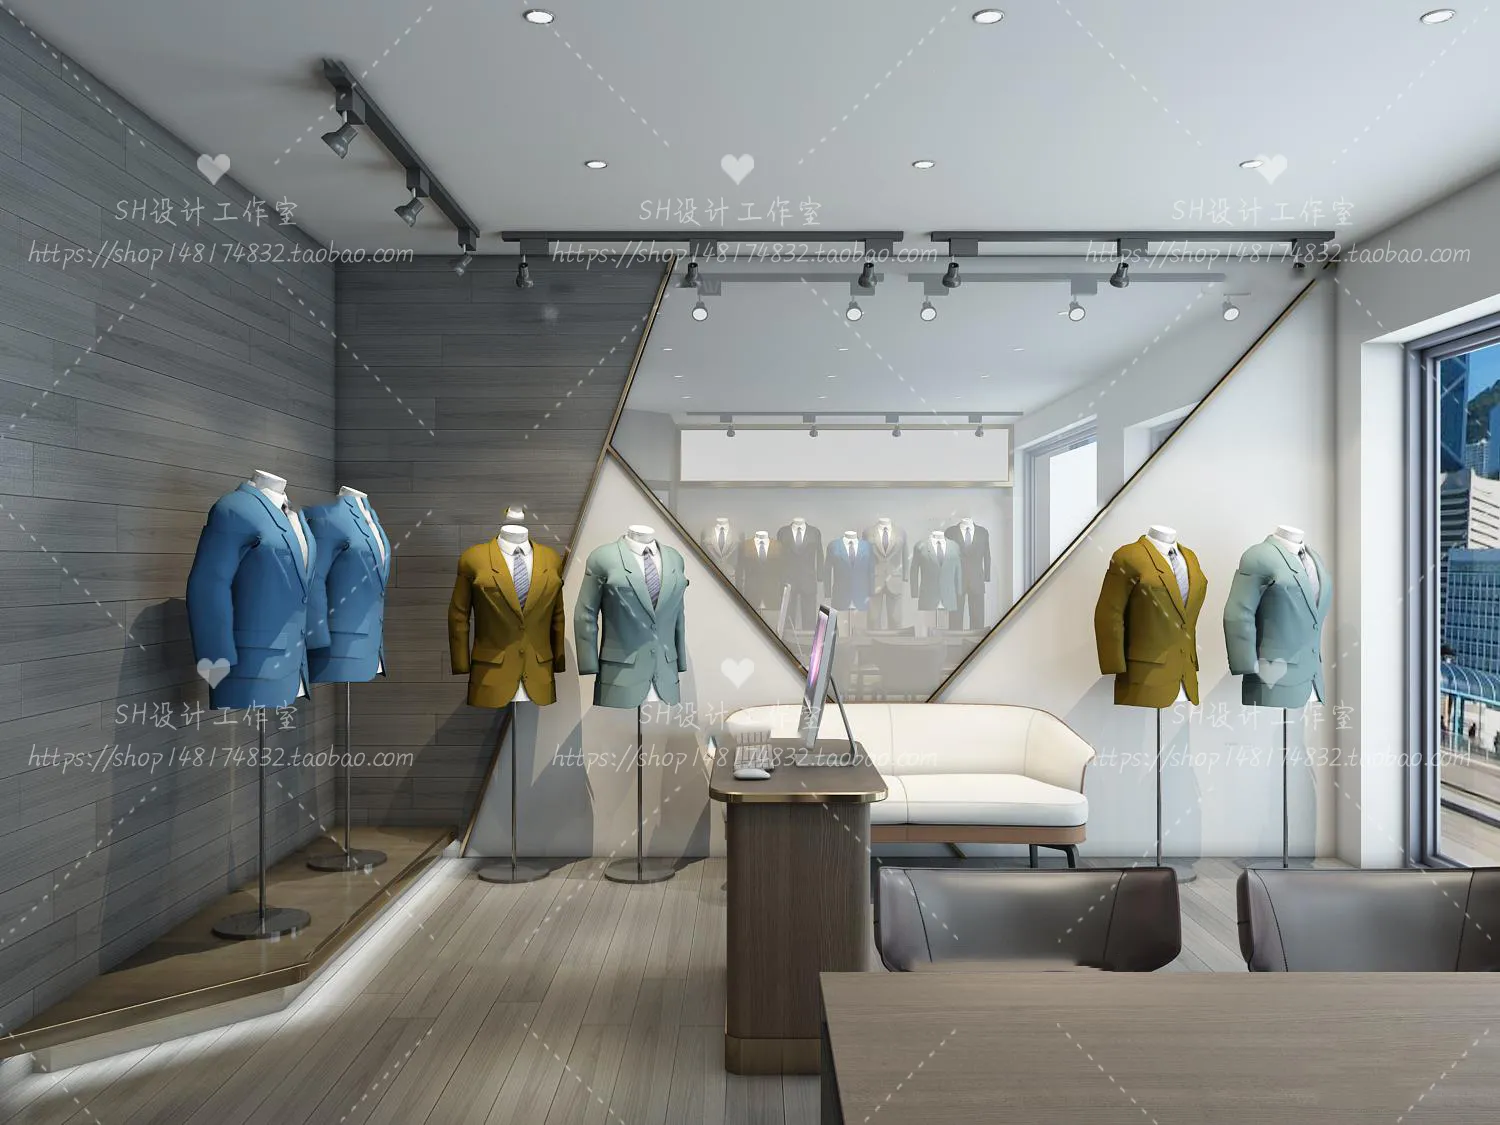 CLOTHING STORE 3D SCENES – VRAY RENDER – 65